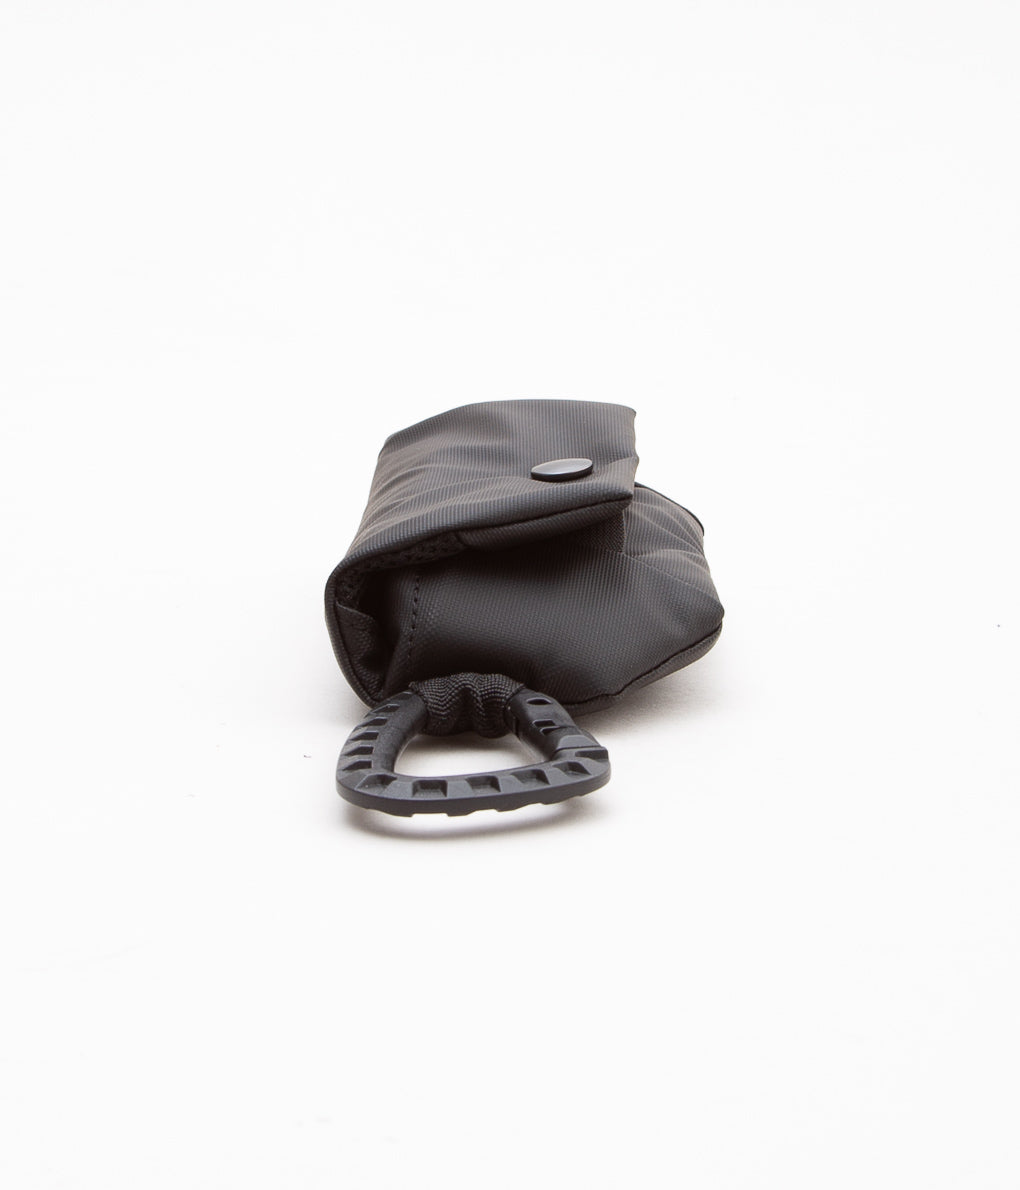 BAGJACK "MOUSE POUCH L CARABINER"(HIGH GROSSY)